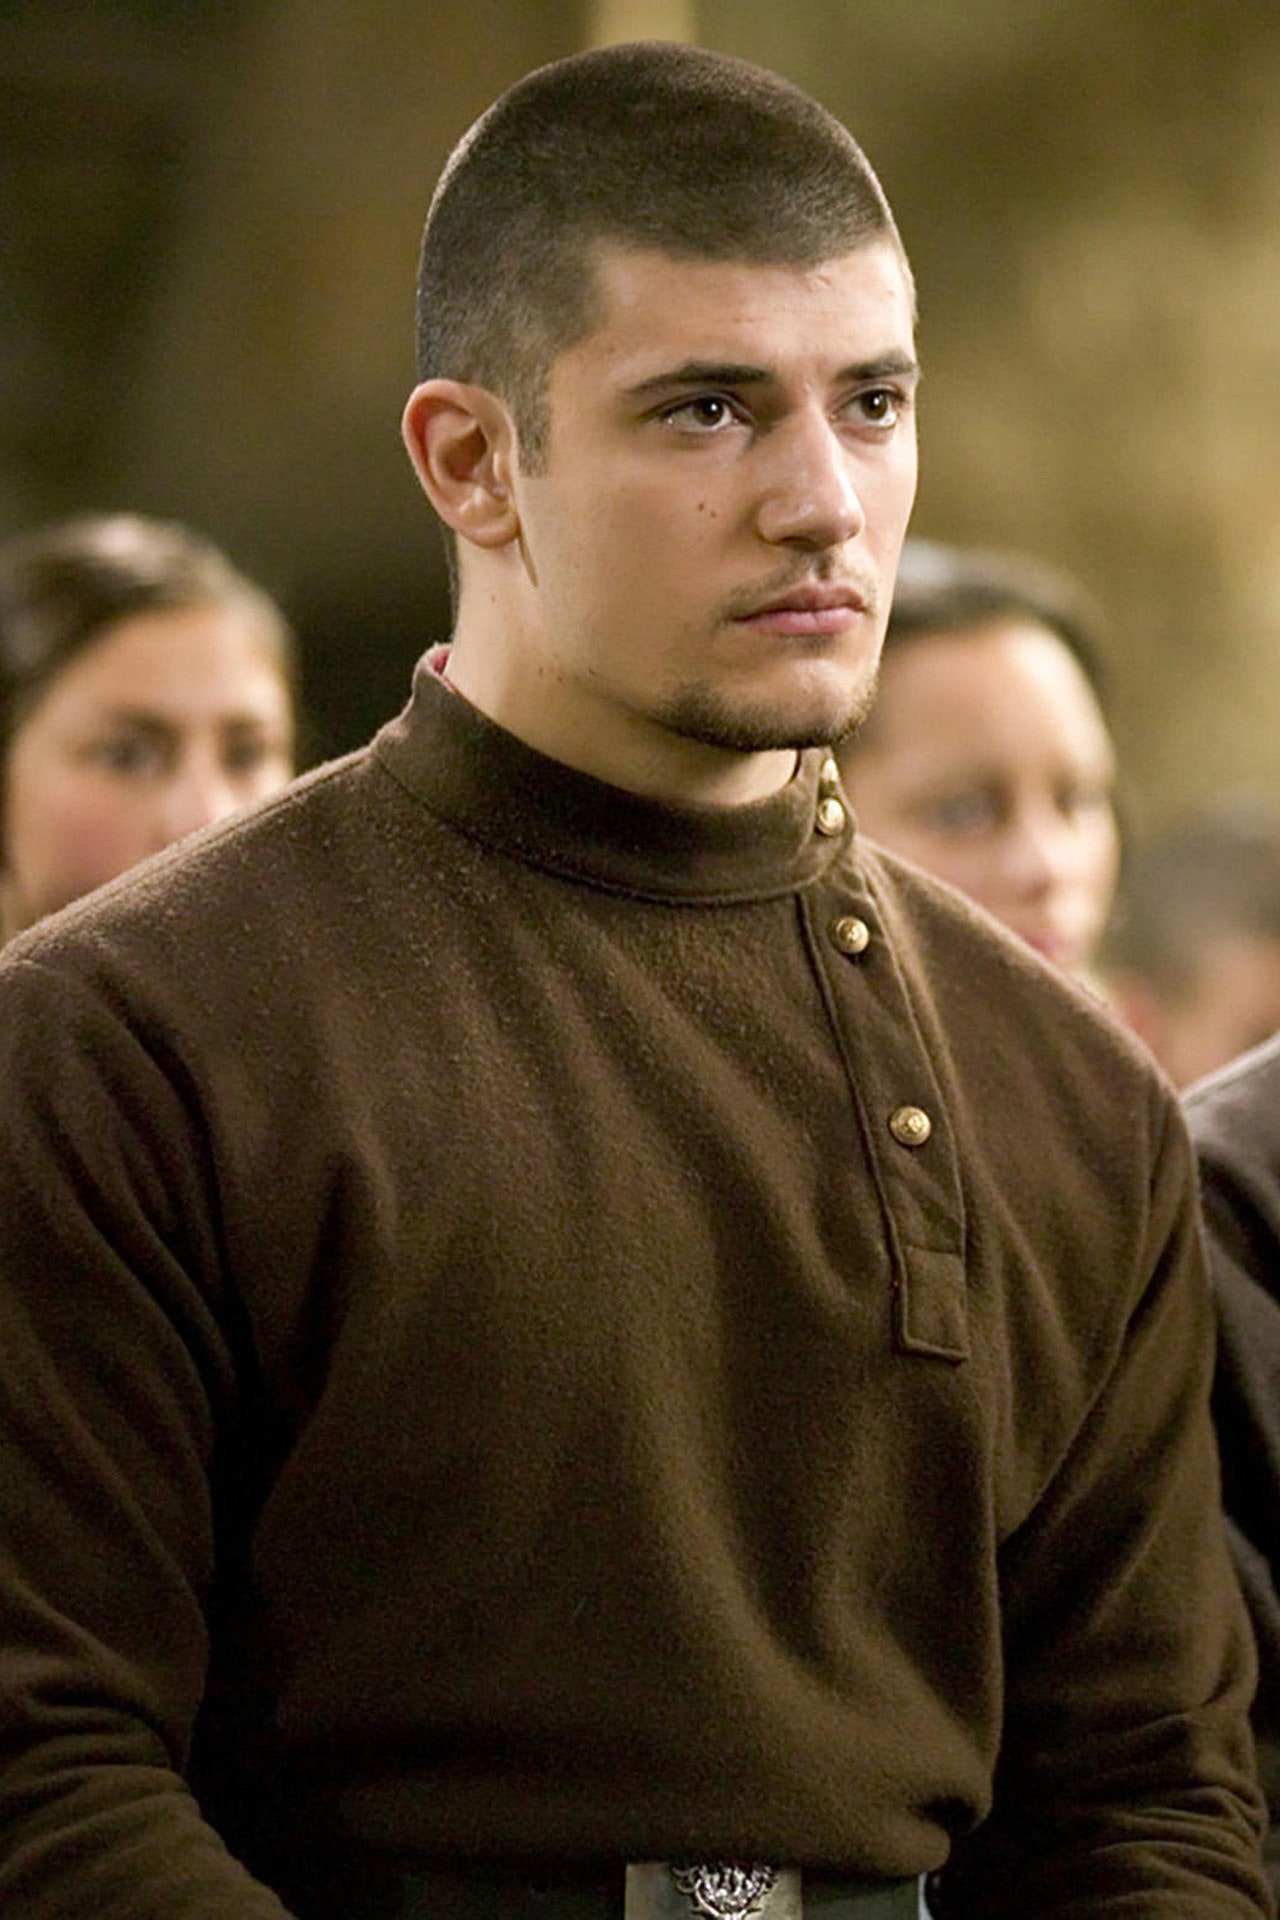 Who played Viktor Krum in the Harry Potter series? 2